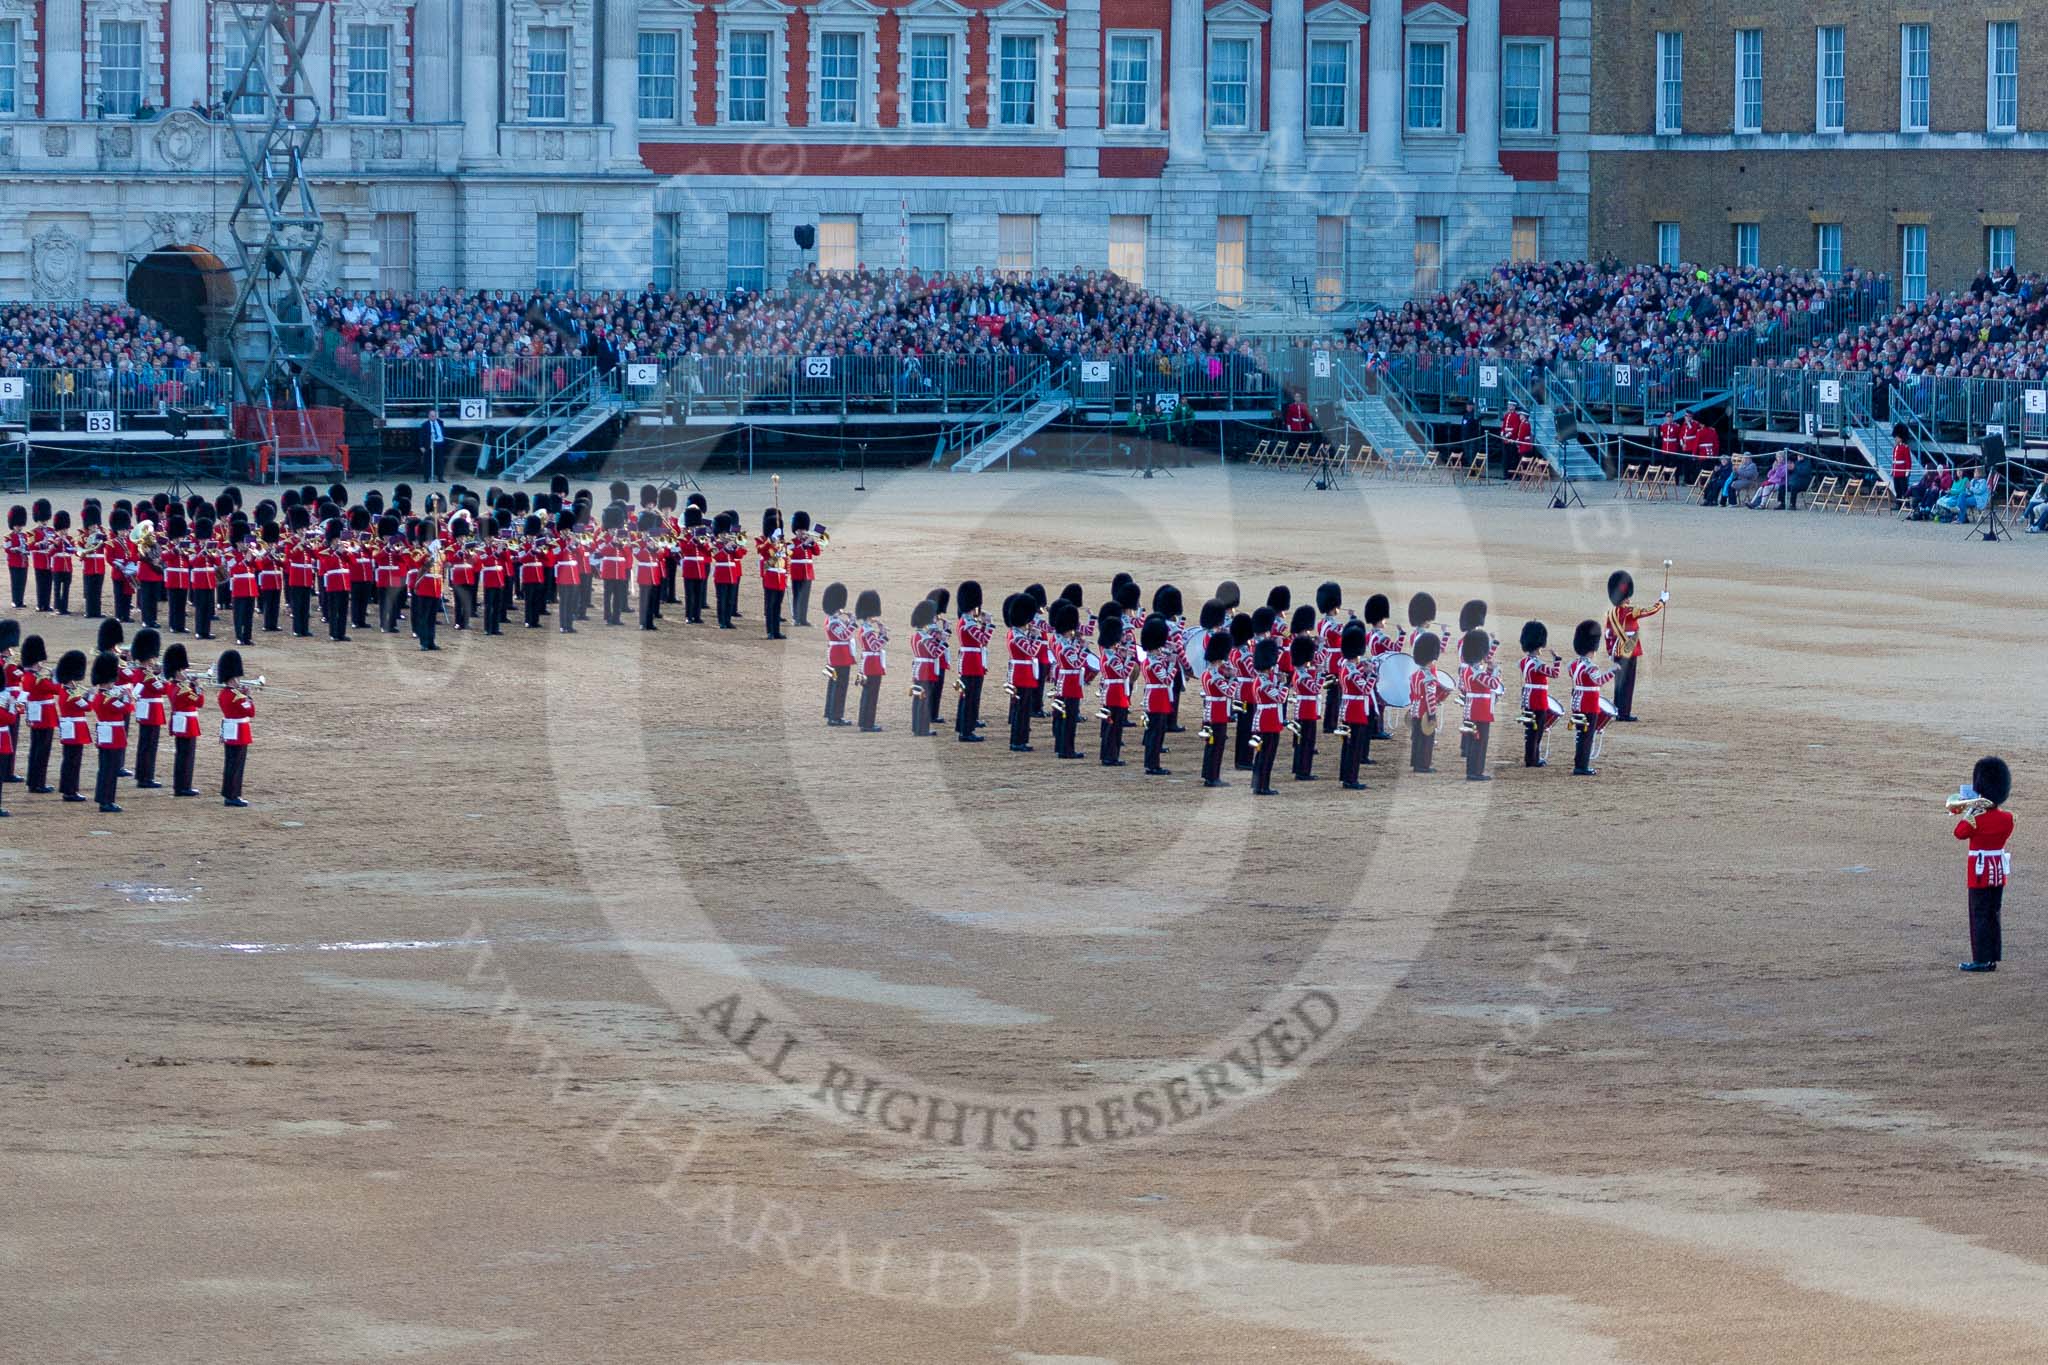 Beating Retreat 2015 - Waterloo 200.
Horse Guards Parade, Westminster,
London,

United Kingdom,
on 10 June 2015 at 21:09, image #256